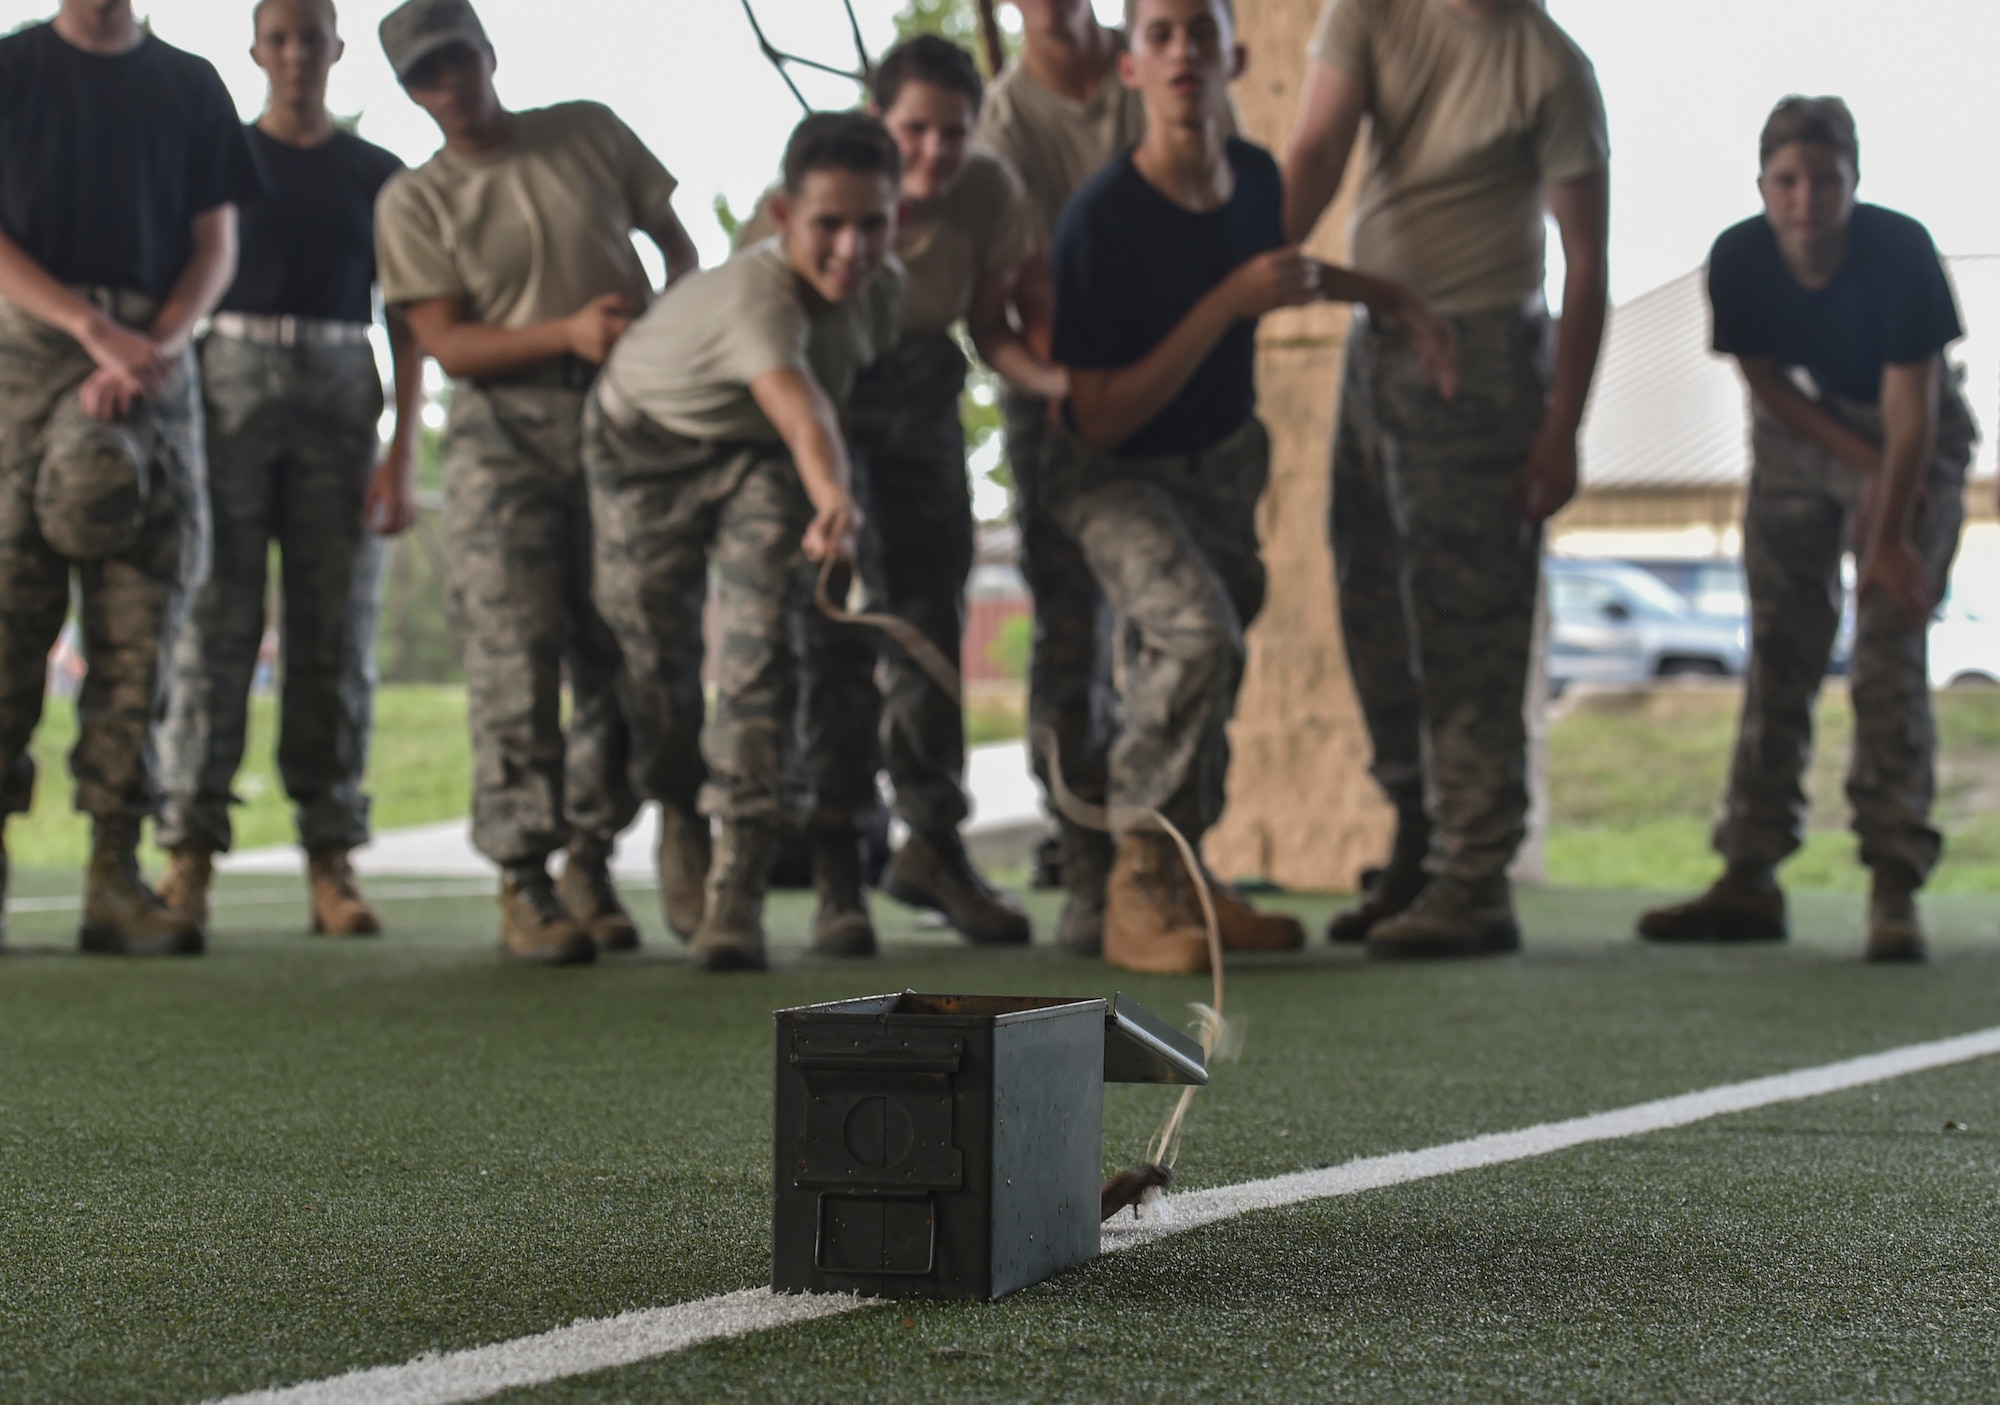 Junior ROTC cadets attempt to hook an ammo can during a leadership reaction course at Summer Leadership School at Hurlburt Field, Fla., June 27, 2017. Special Tactics Airmen partnered with more than 50 cadets from five local high schools for a week-long Summer Leadership Course to learn about leadership, teamwork, and self-confidence. (U.S. Air Force photo by Senior Airman Ryan Conroy)